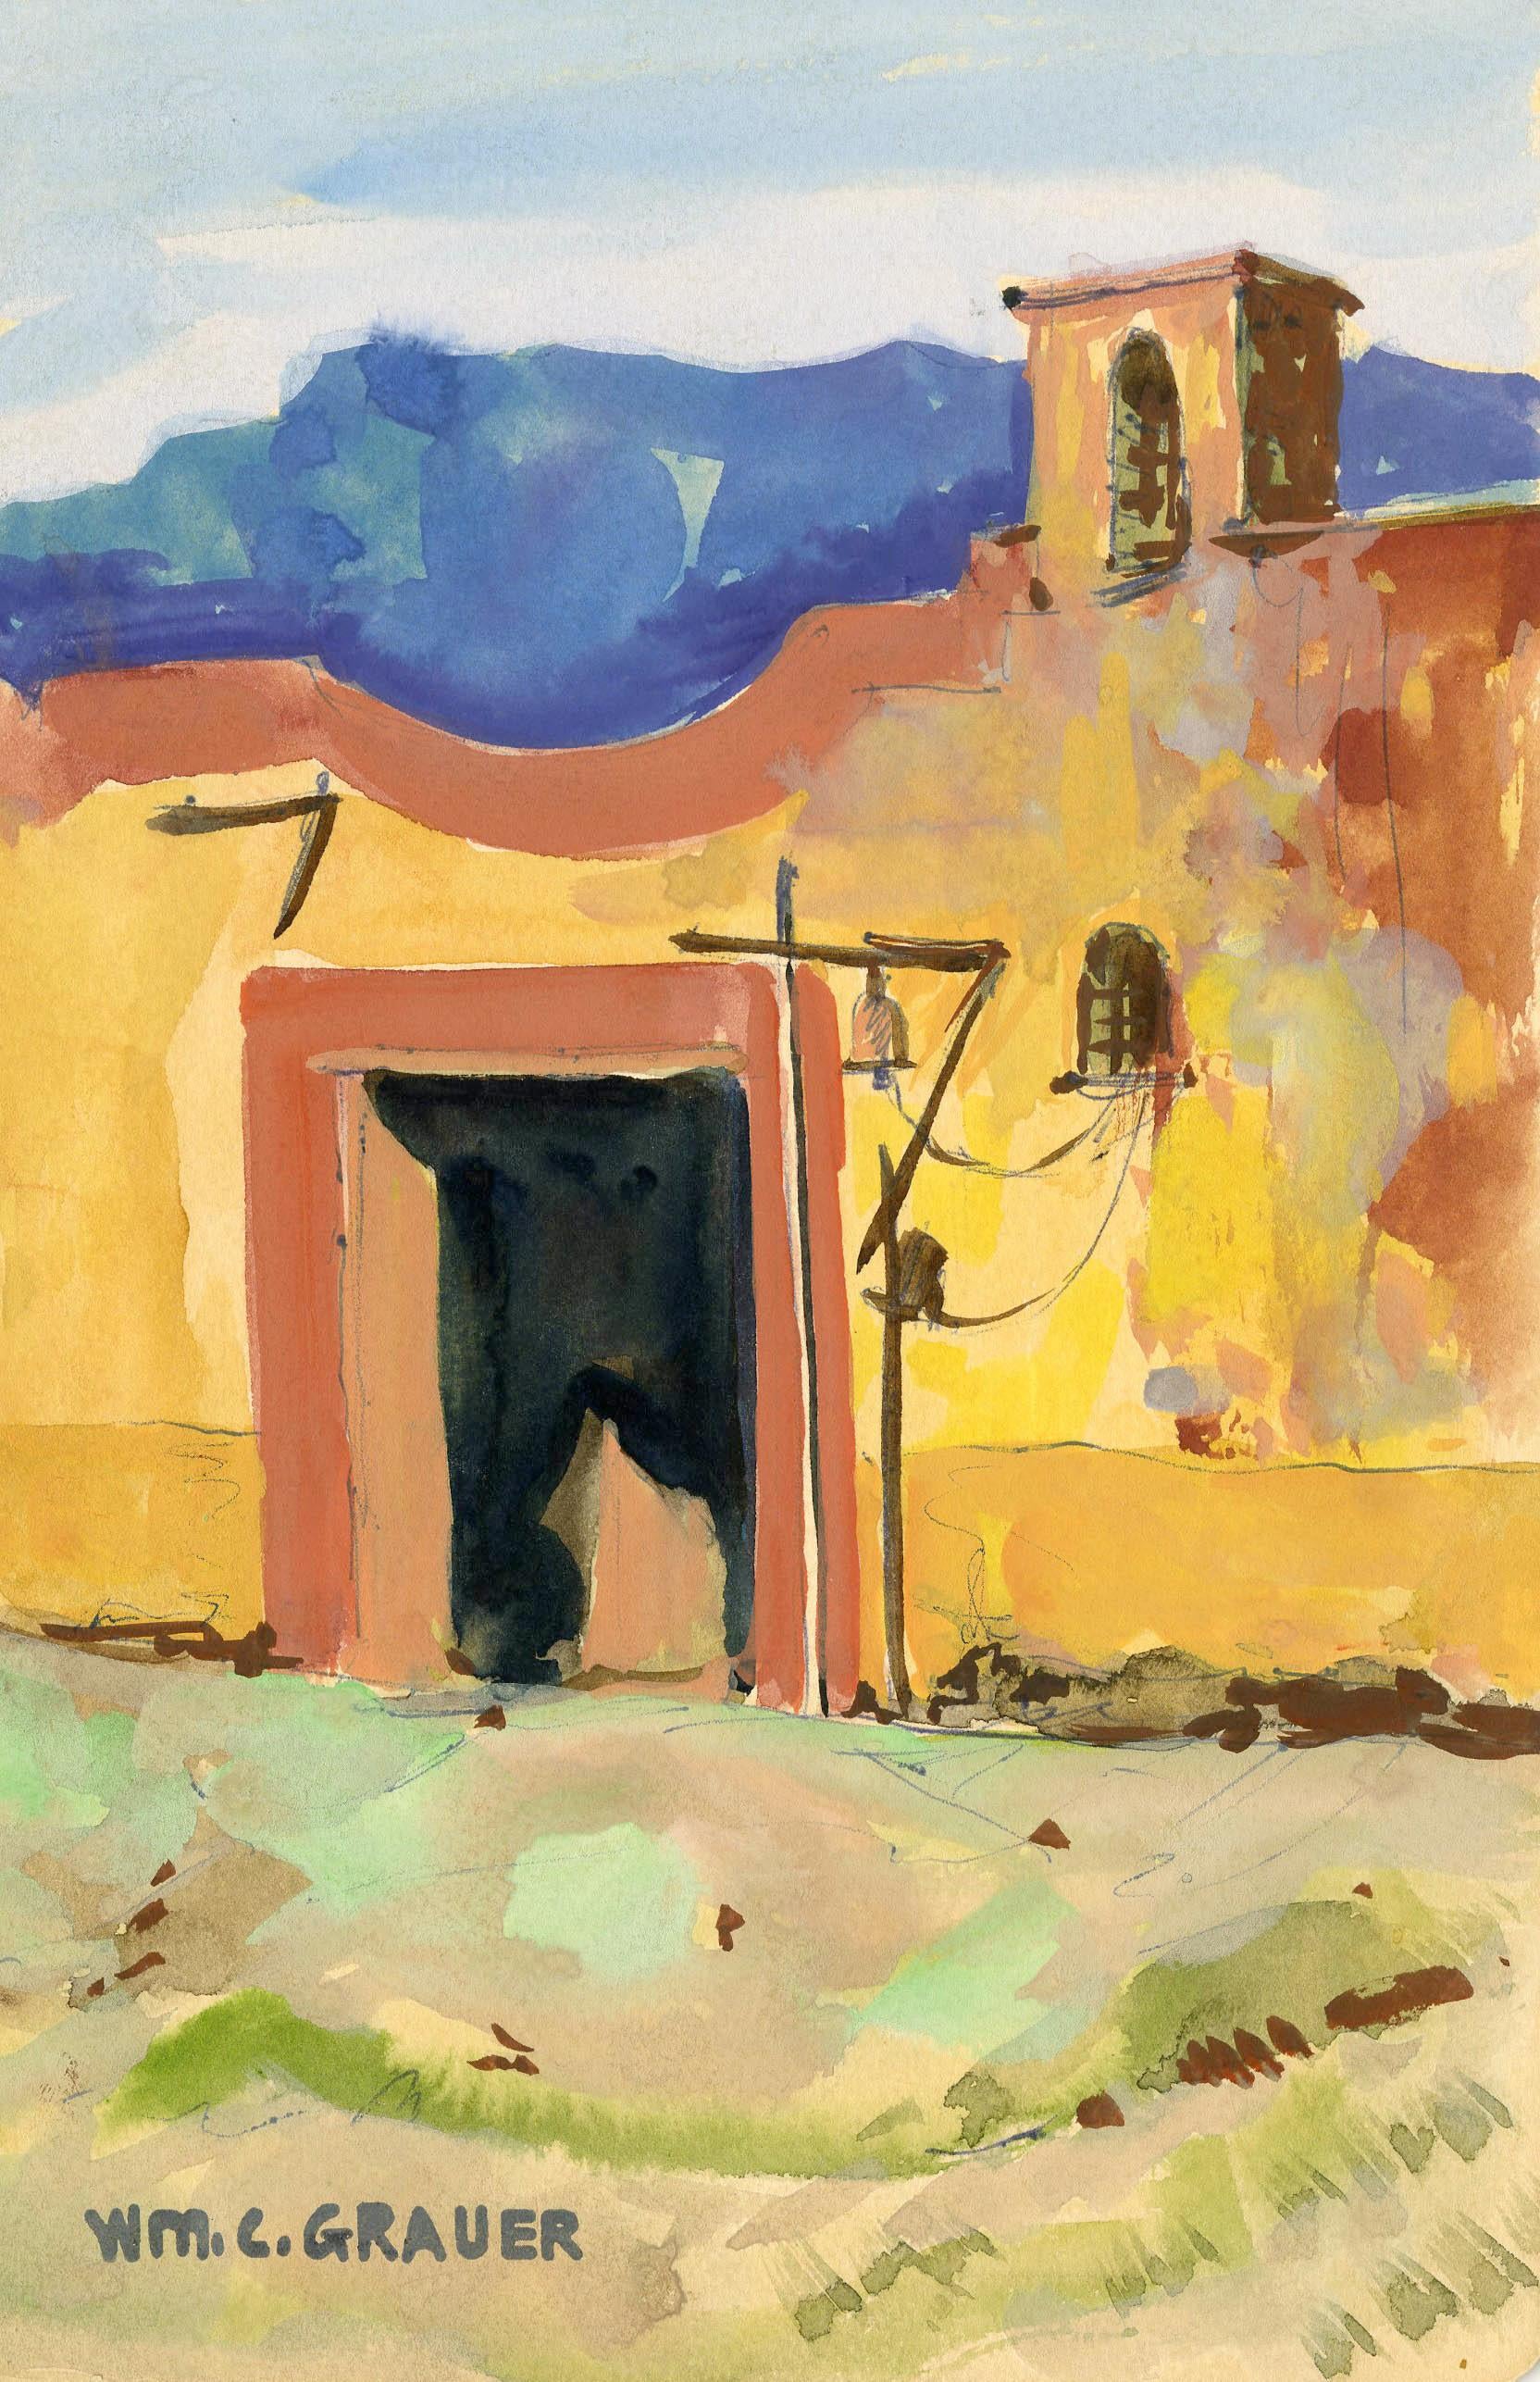 William Grauer Landscape Art - untitled (Yellow Adobe Building with Bell)